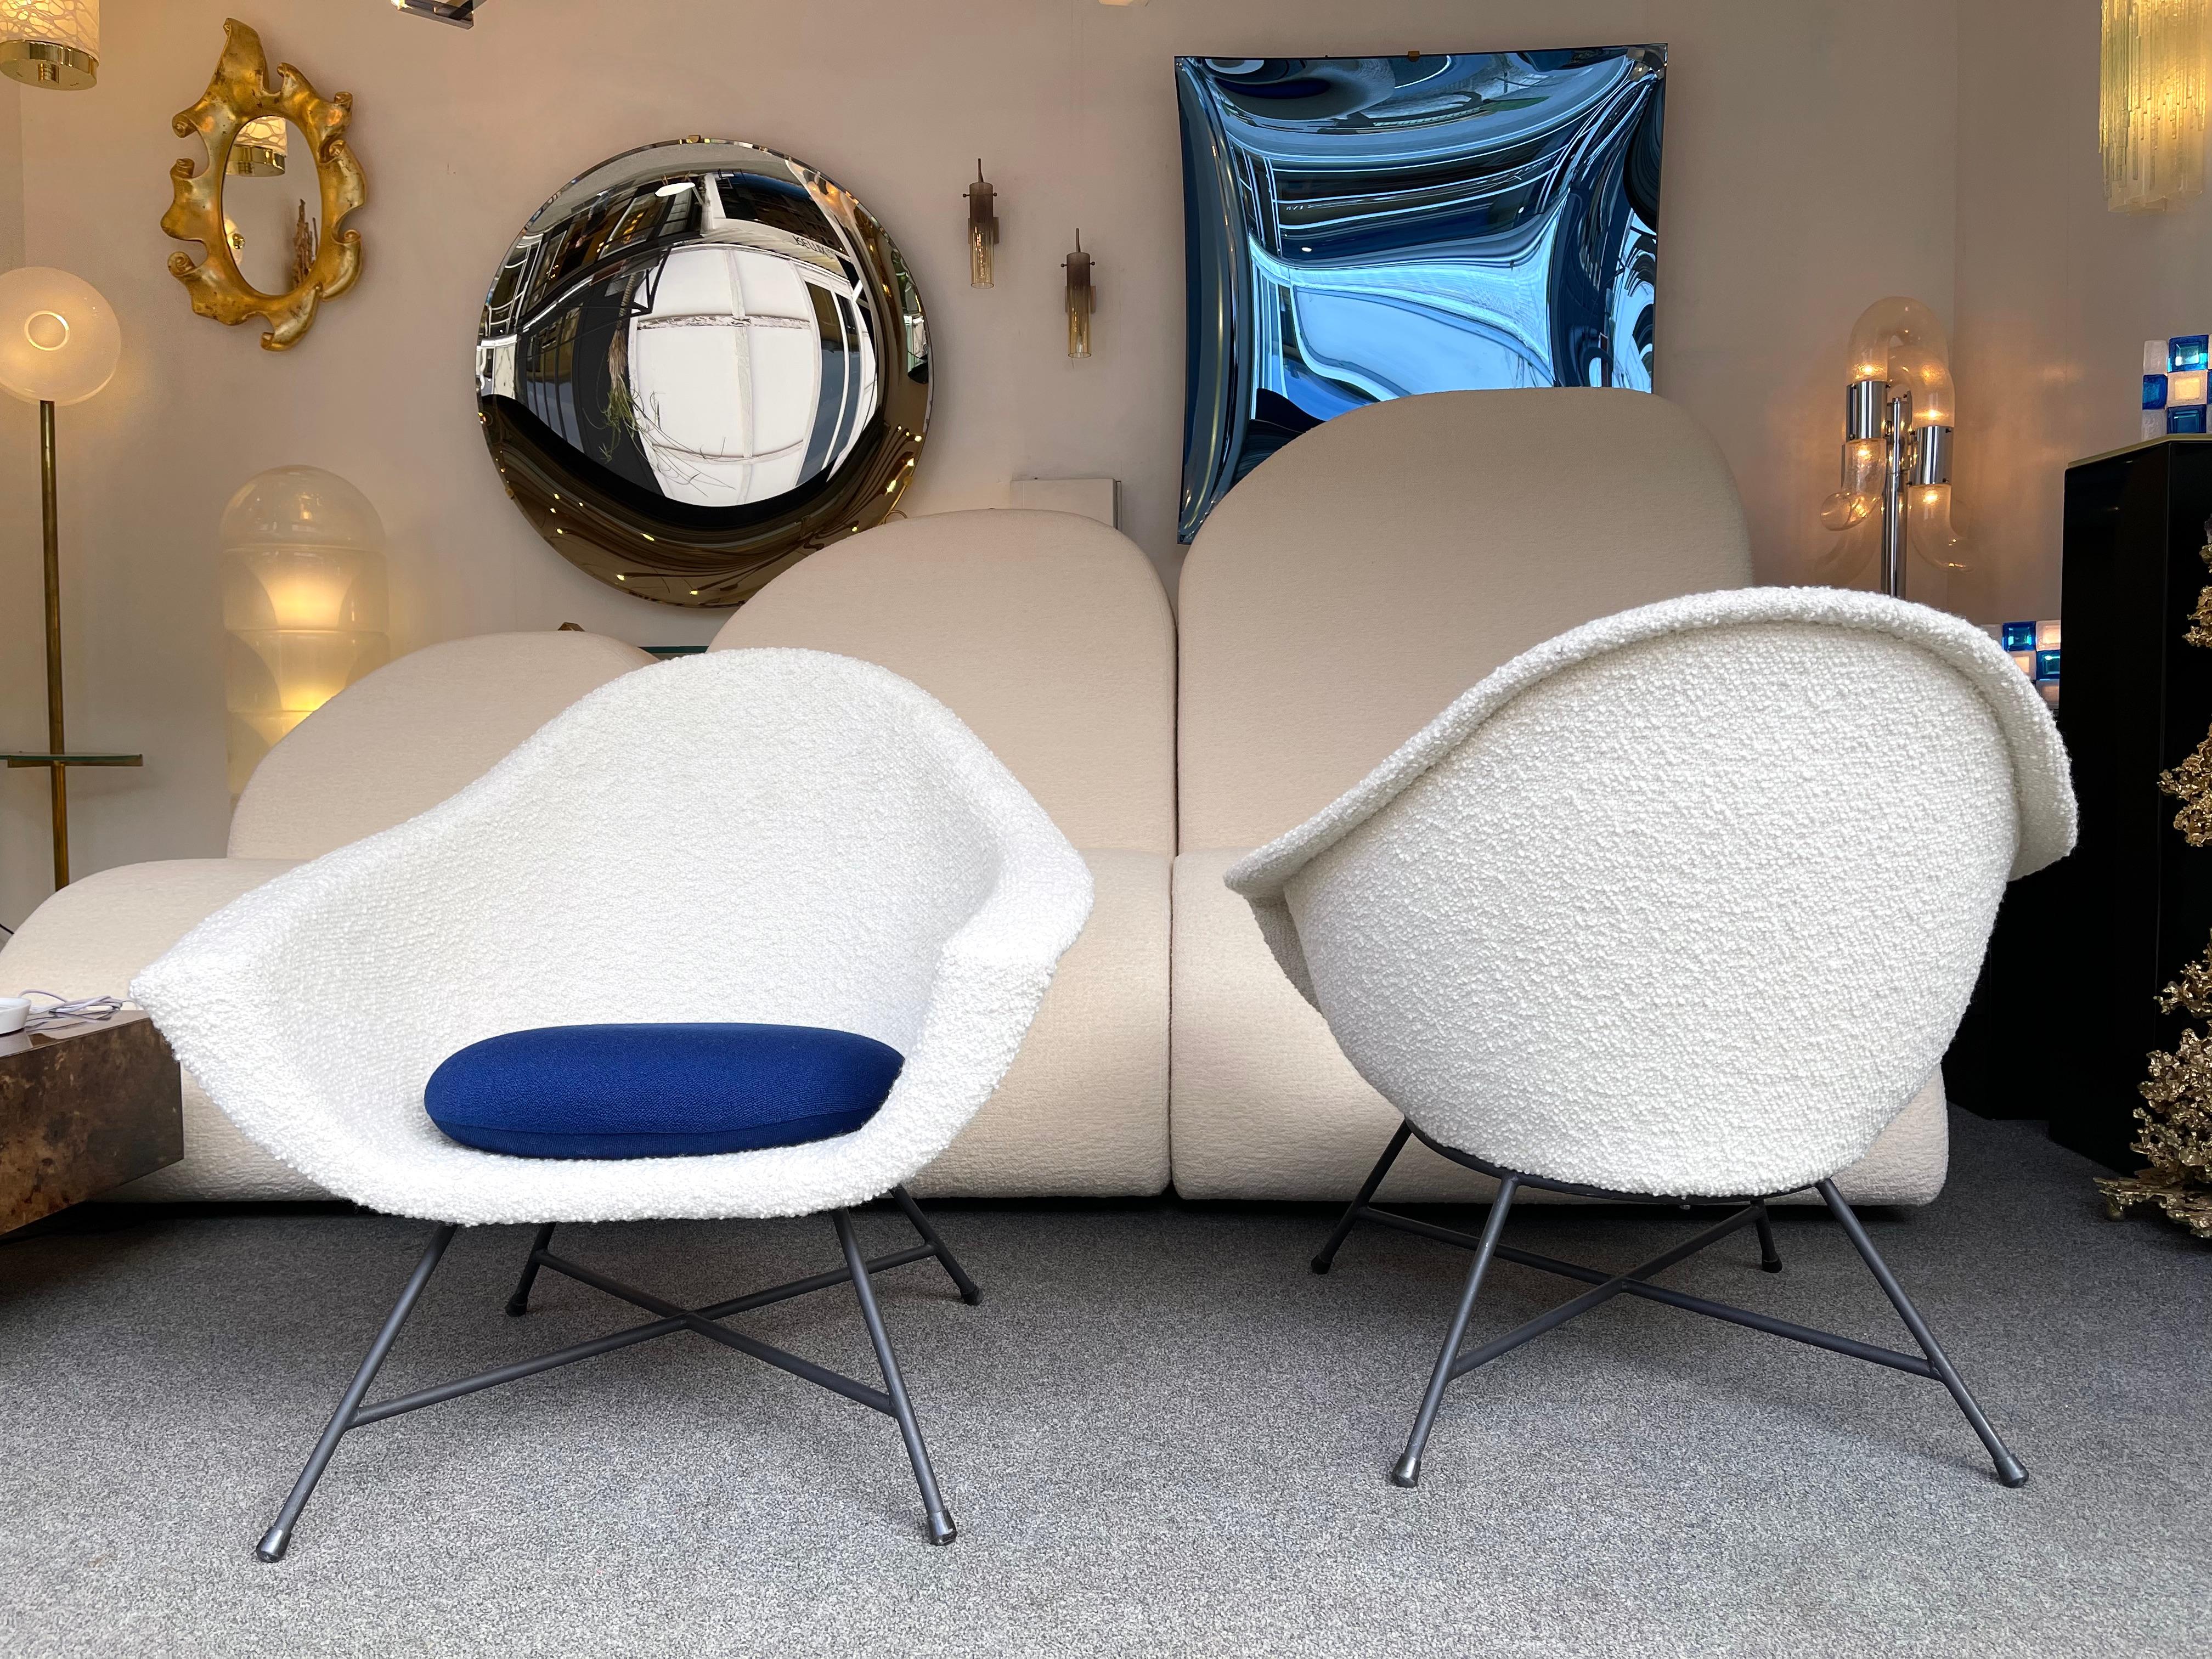 Mid-20th Century Pair of Armchairs 58 by Dangles & Defrance for Burov. France, 1950s For Sale